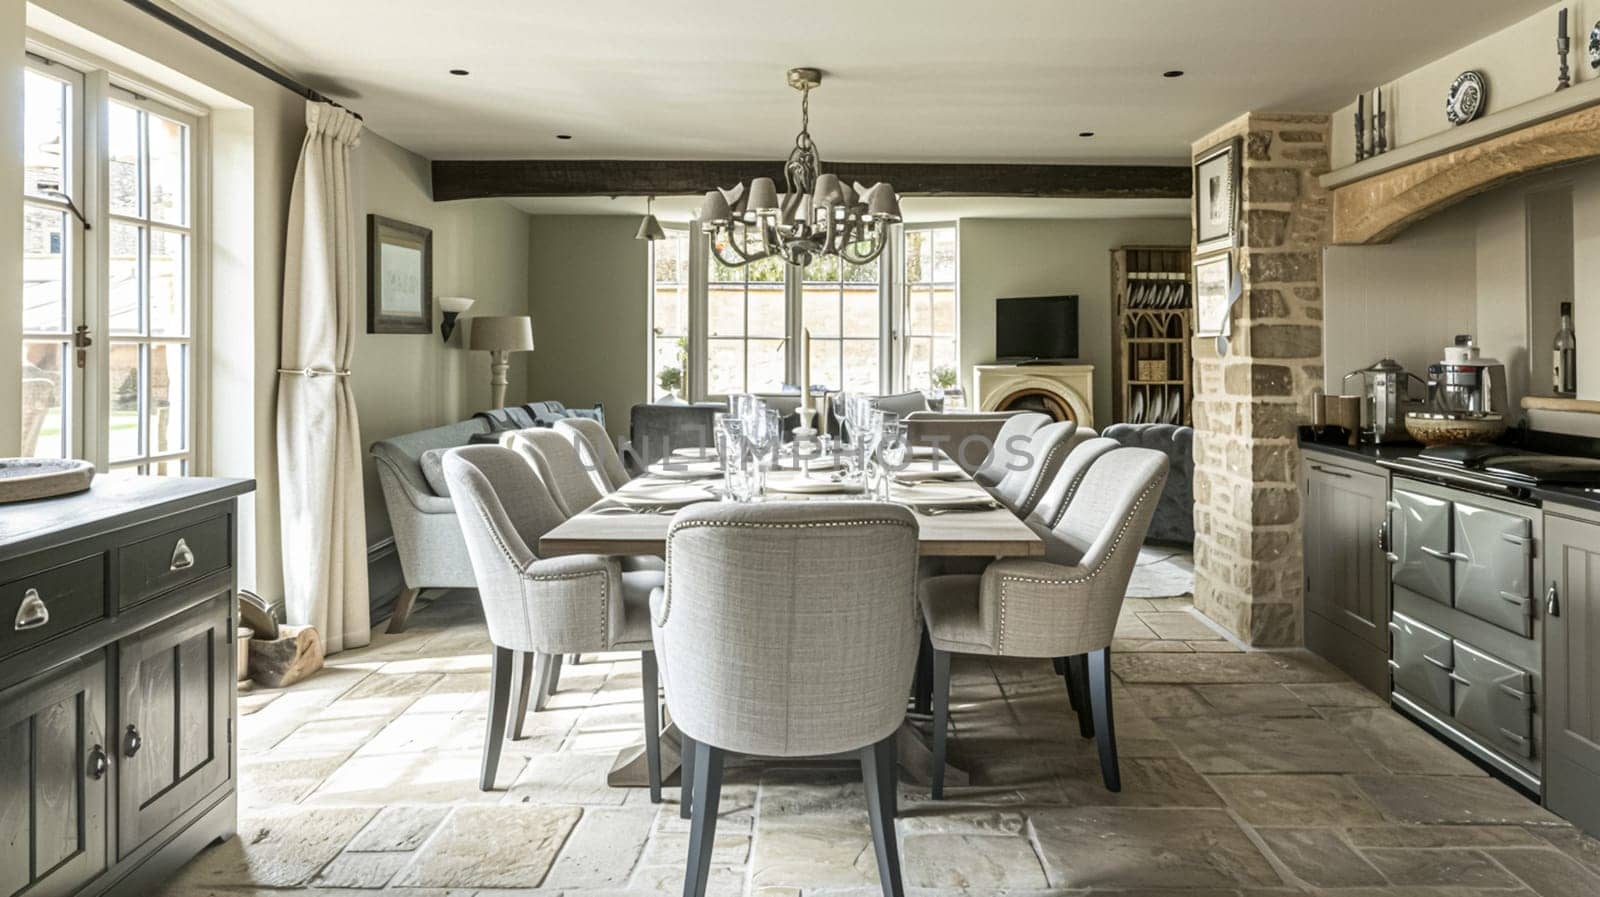 Cotswolds cottage style dining room decor, interior design and country house furniture, home decor, table and chairs, English countryside styling